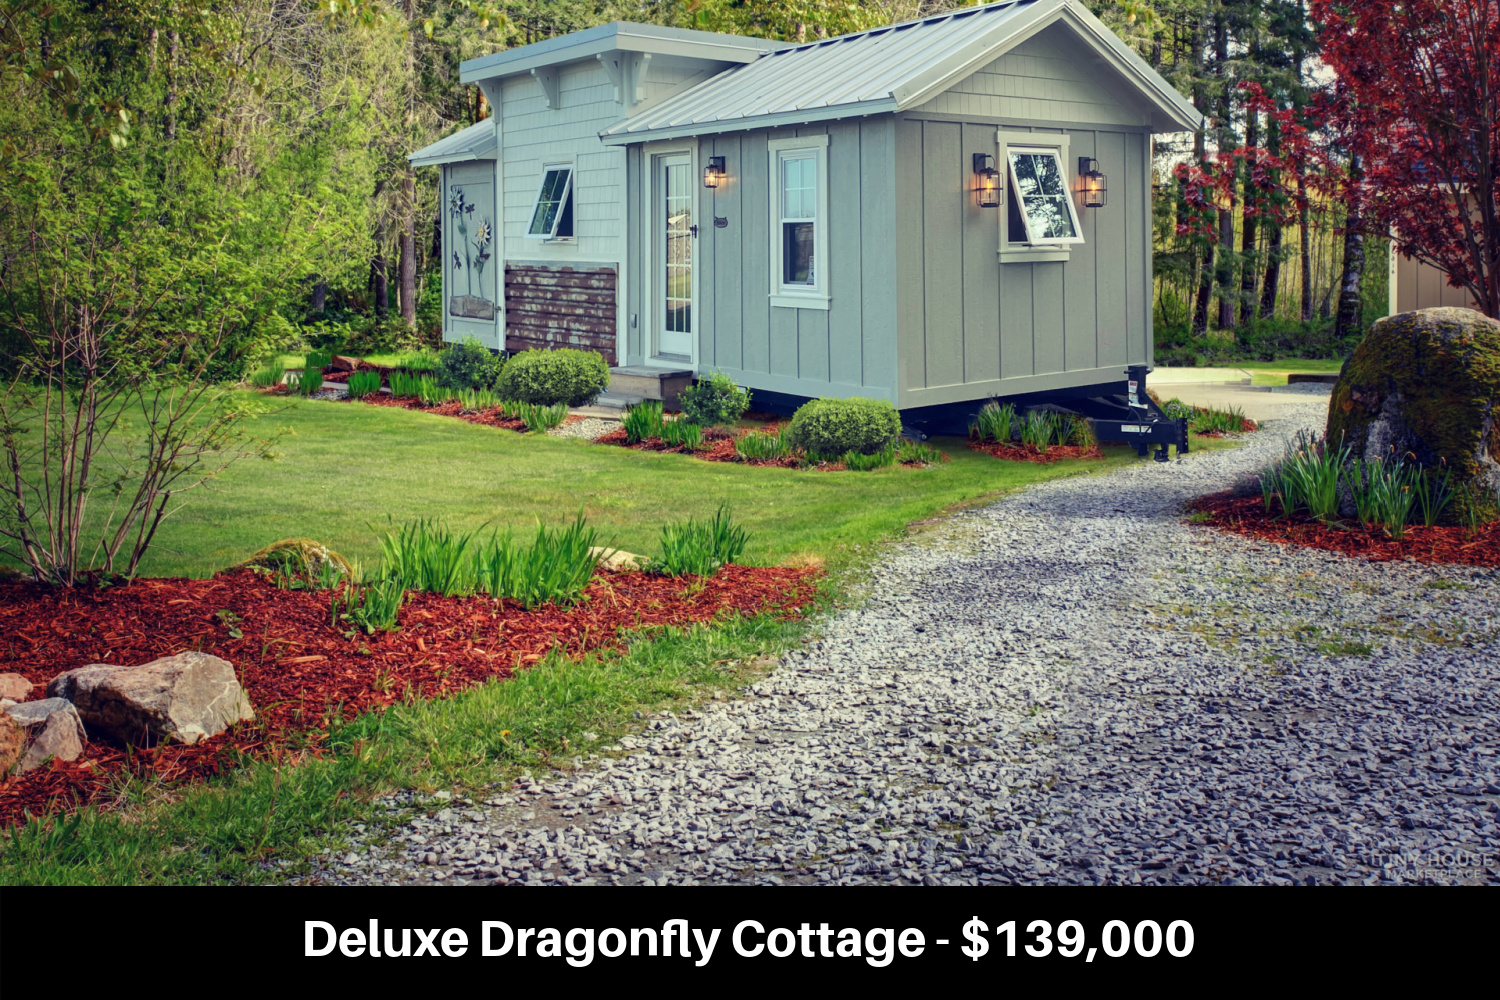 Deluxe Dragonfly Cottage - $139,000